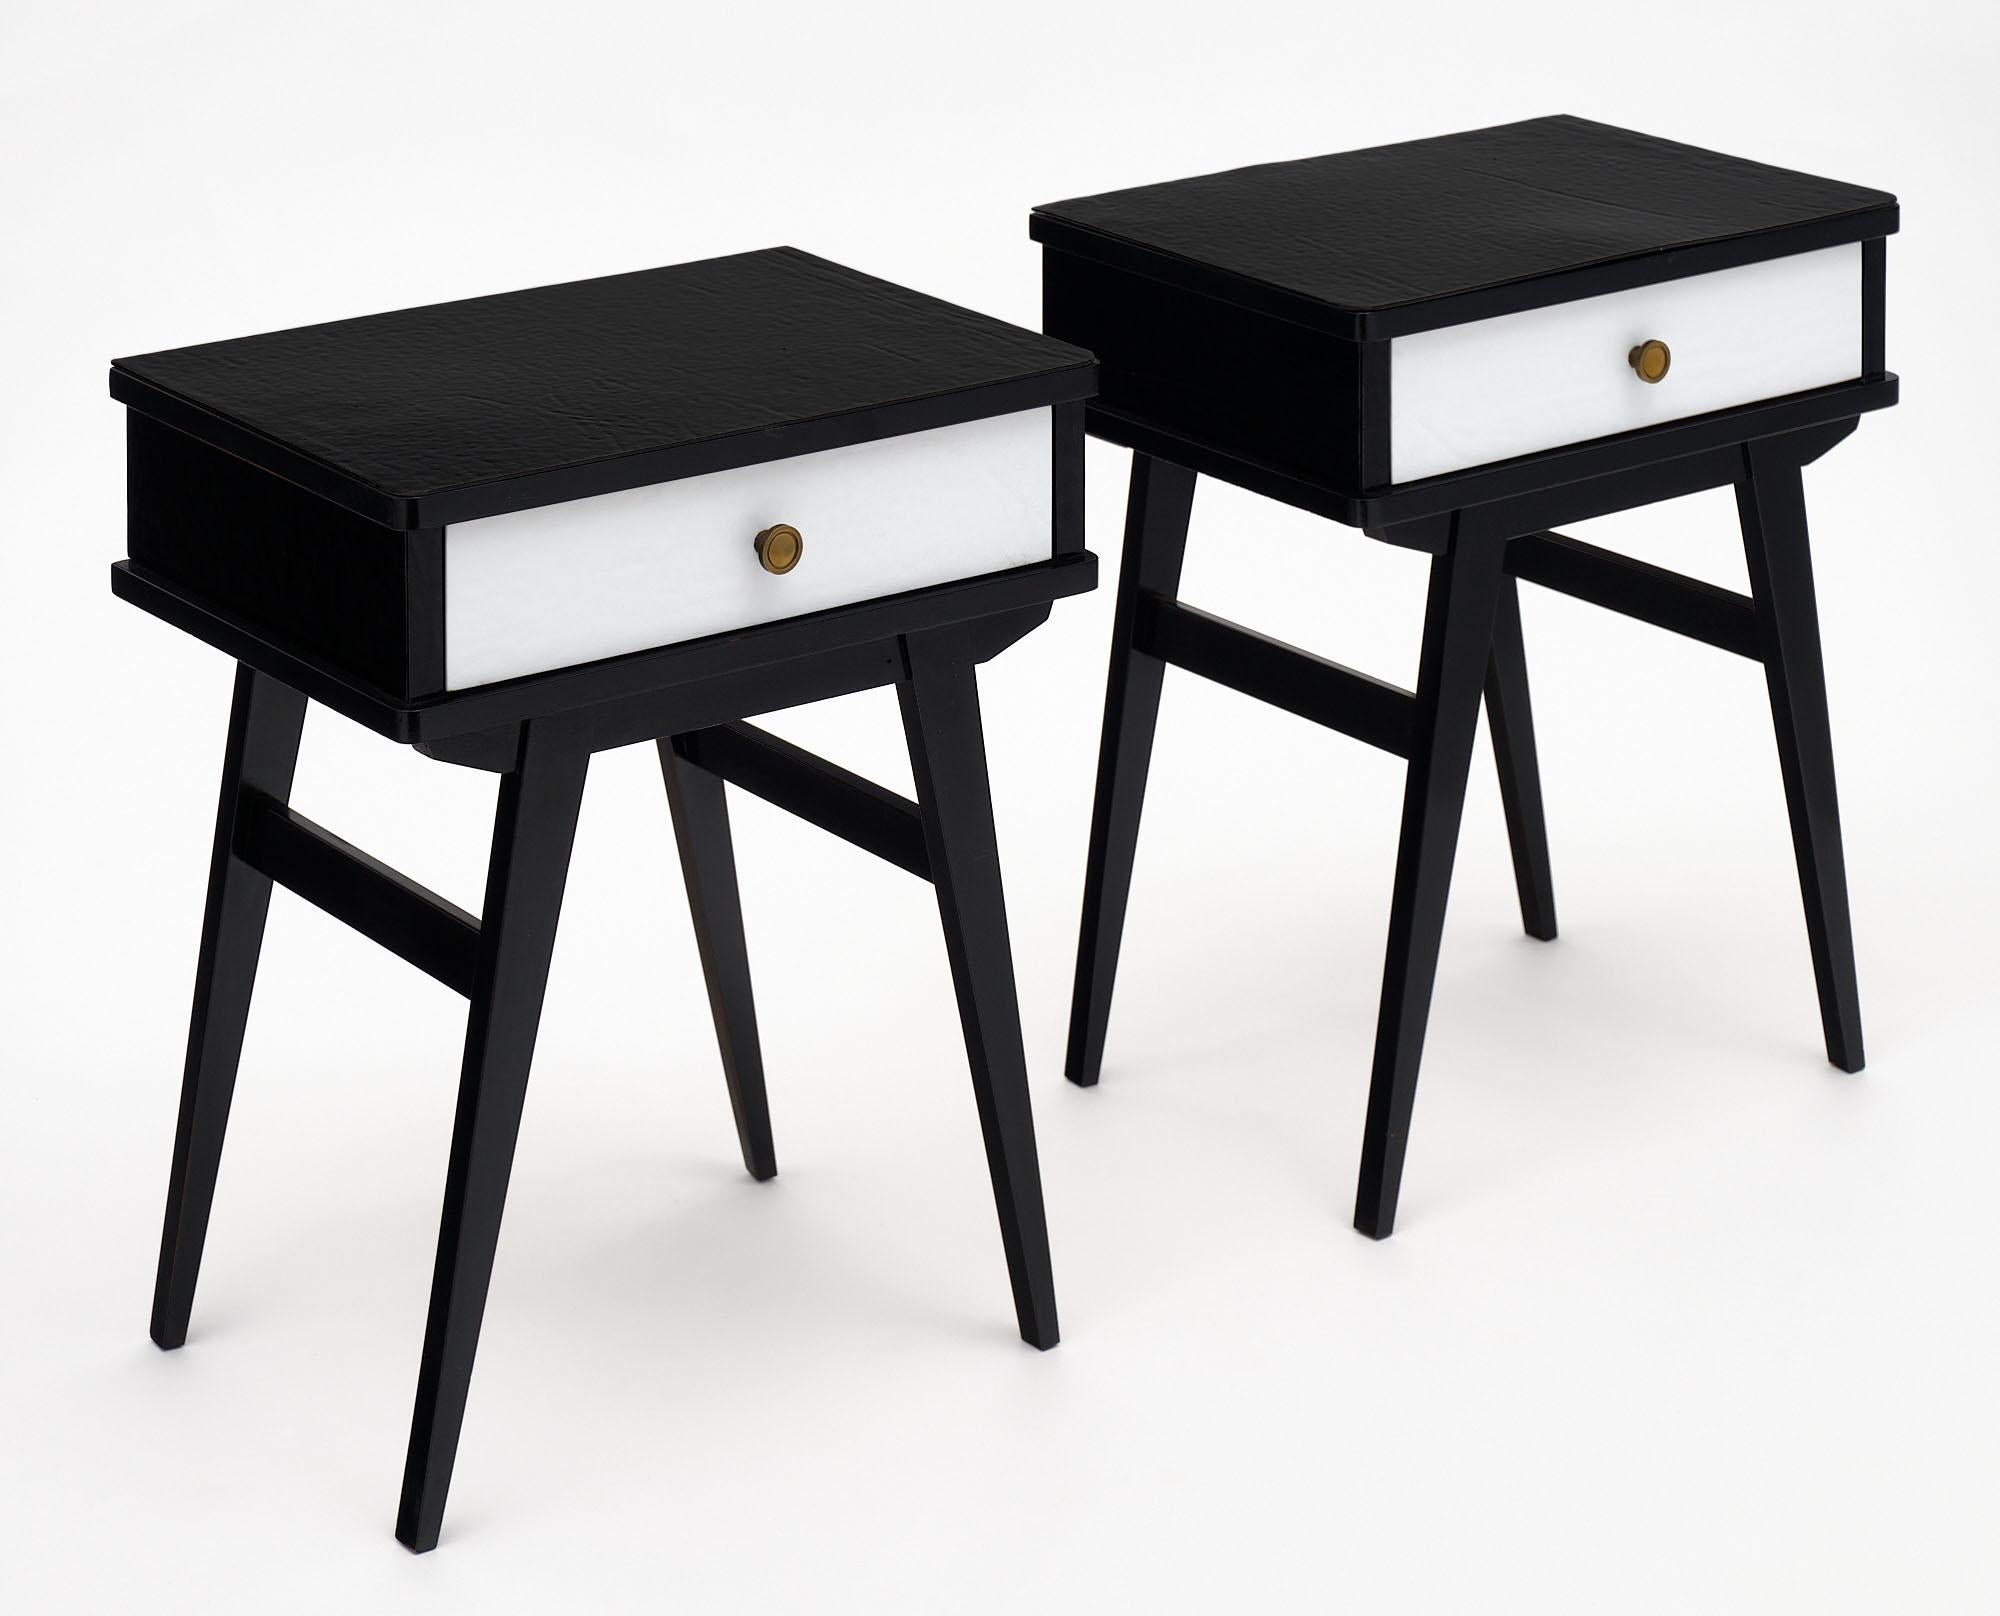 Pair of side tables from Italy that are veneered in black and white textured Murano glass. Each features one drawer with a bronze knob and is supported by ebonized legs.